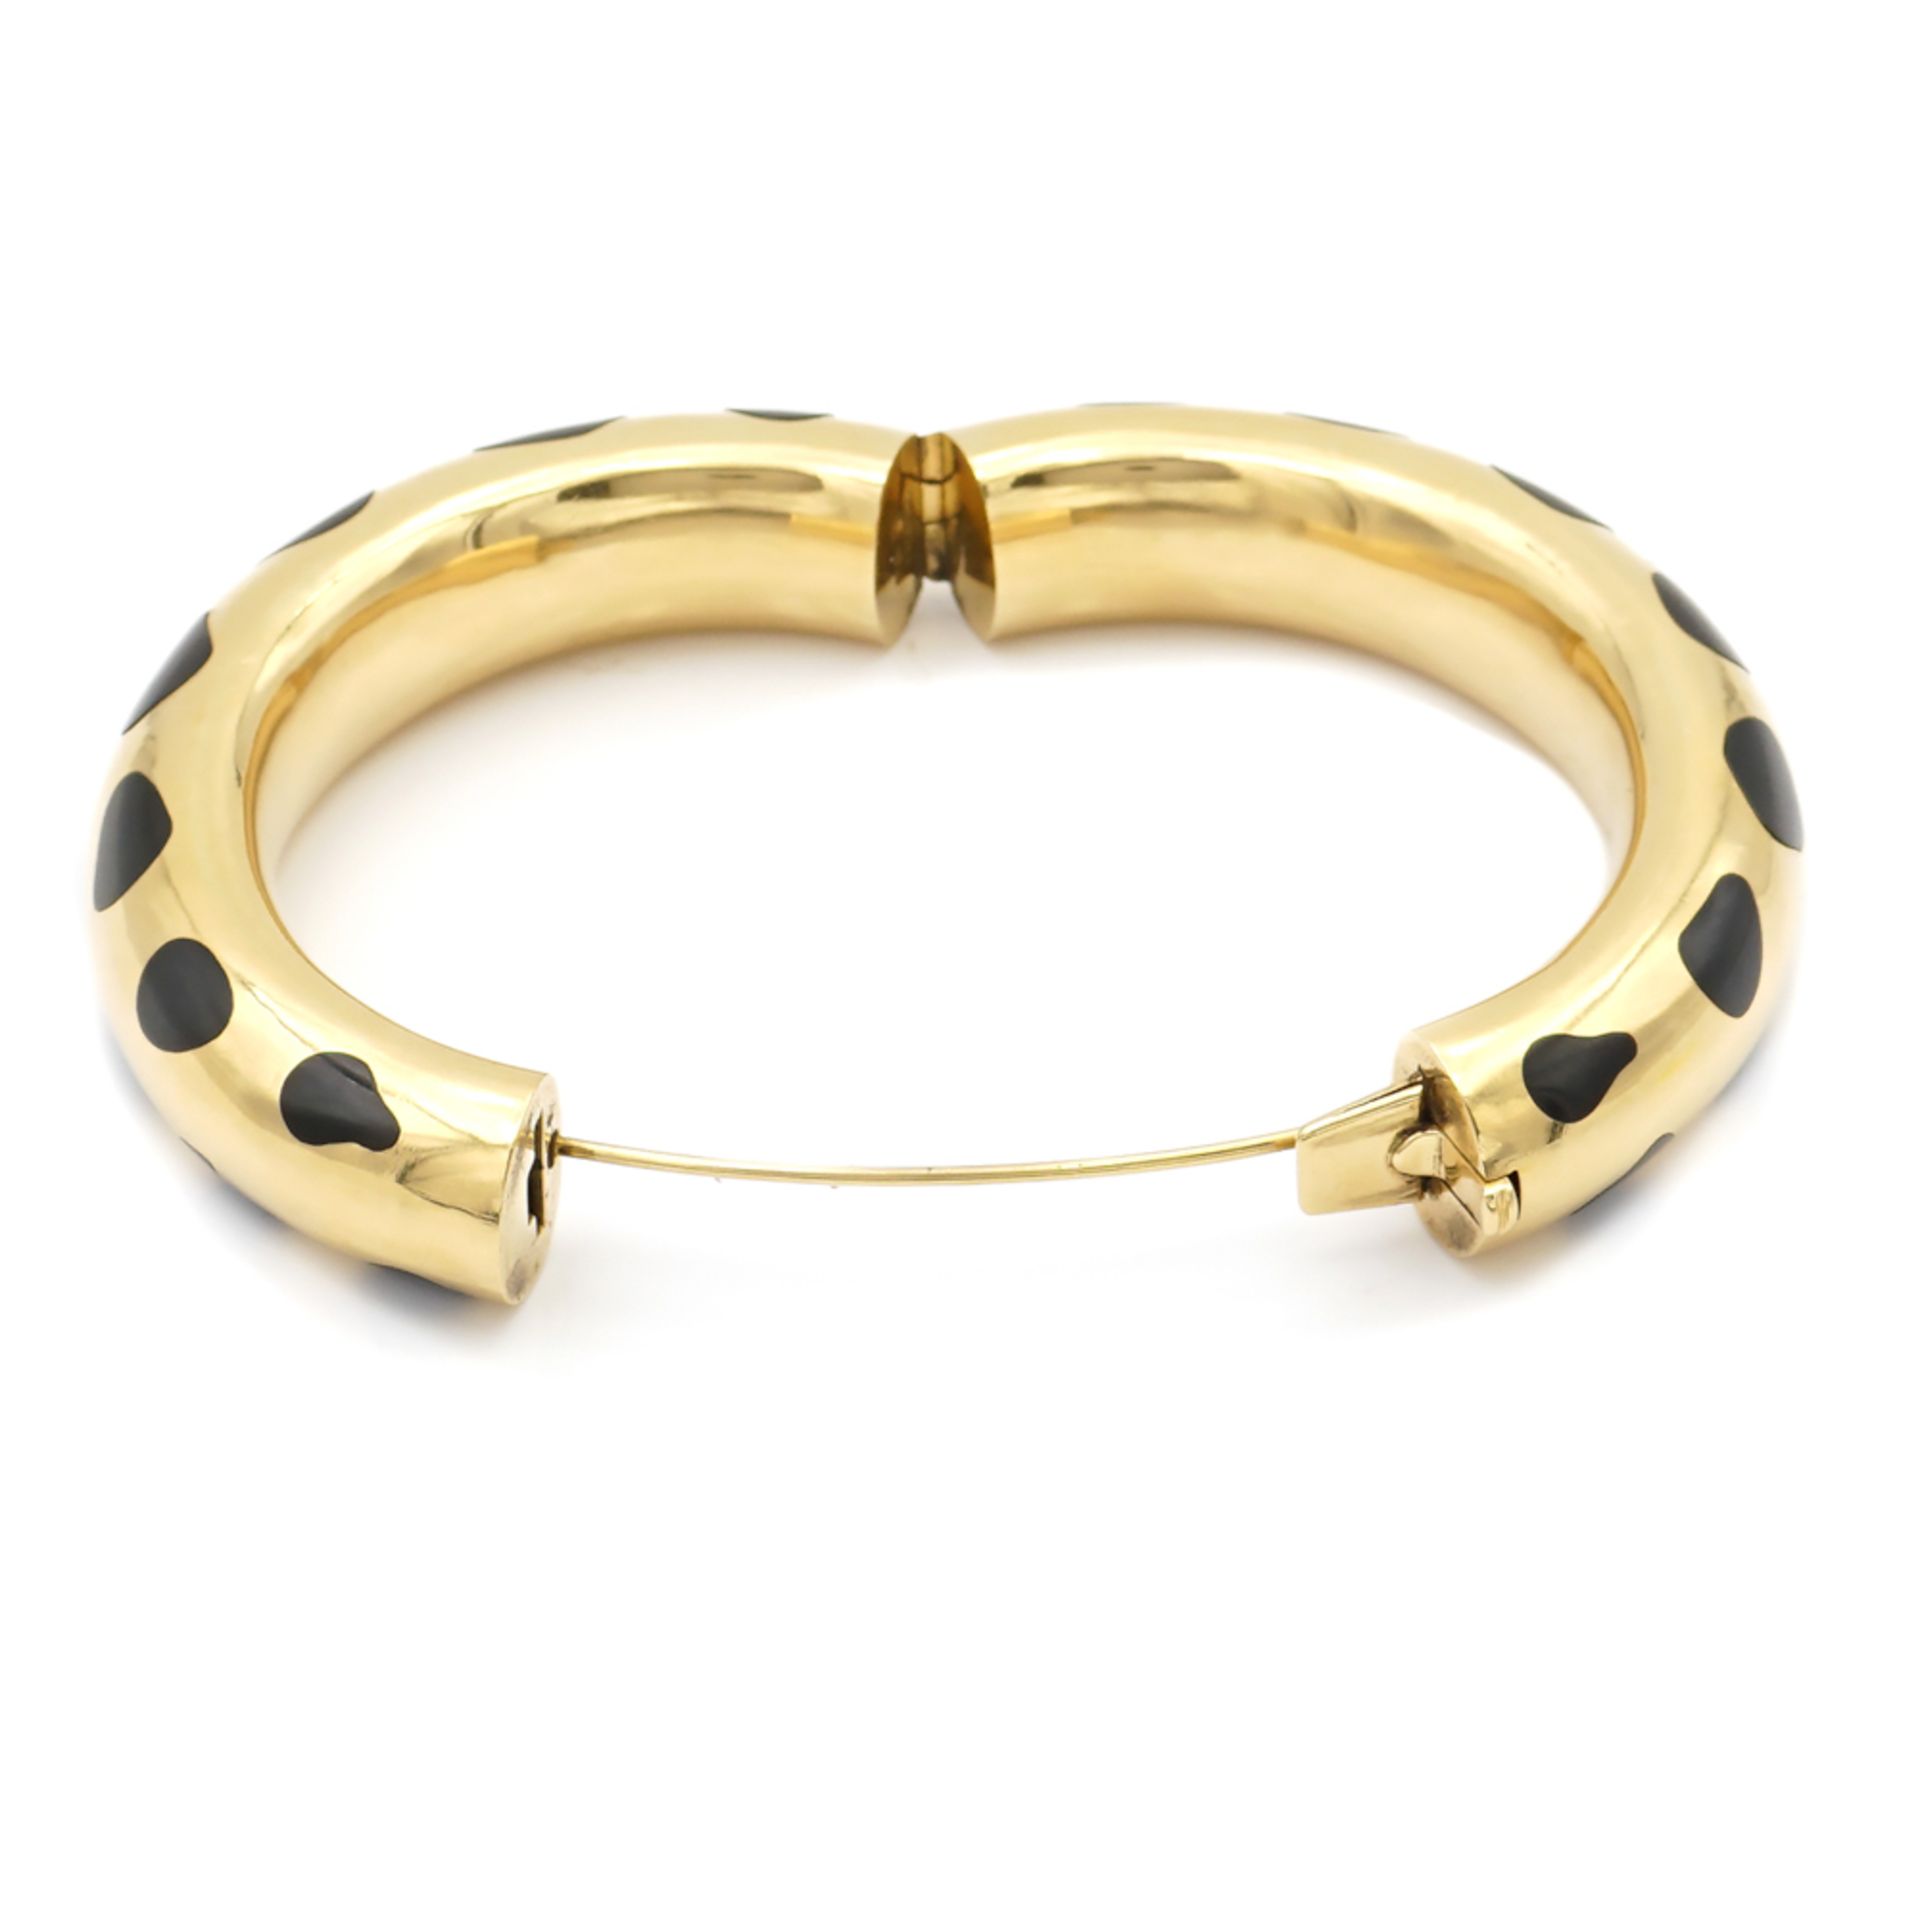 Tiffany & Co., 18kt yellow gold and black onyx cuff bracelet 1970/80s weight 80 gr. - Image 2 of 3